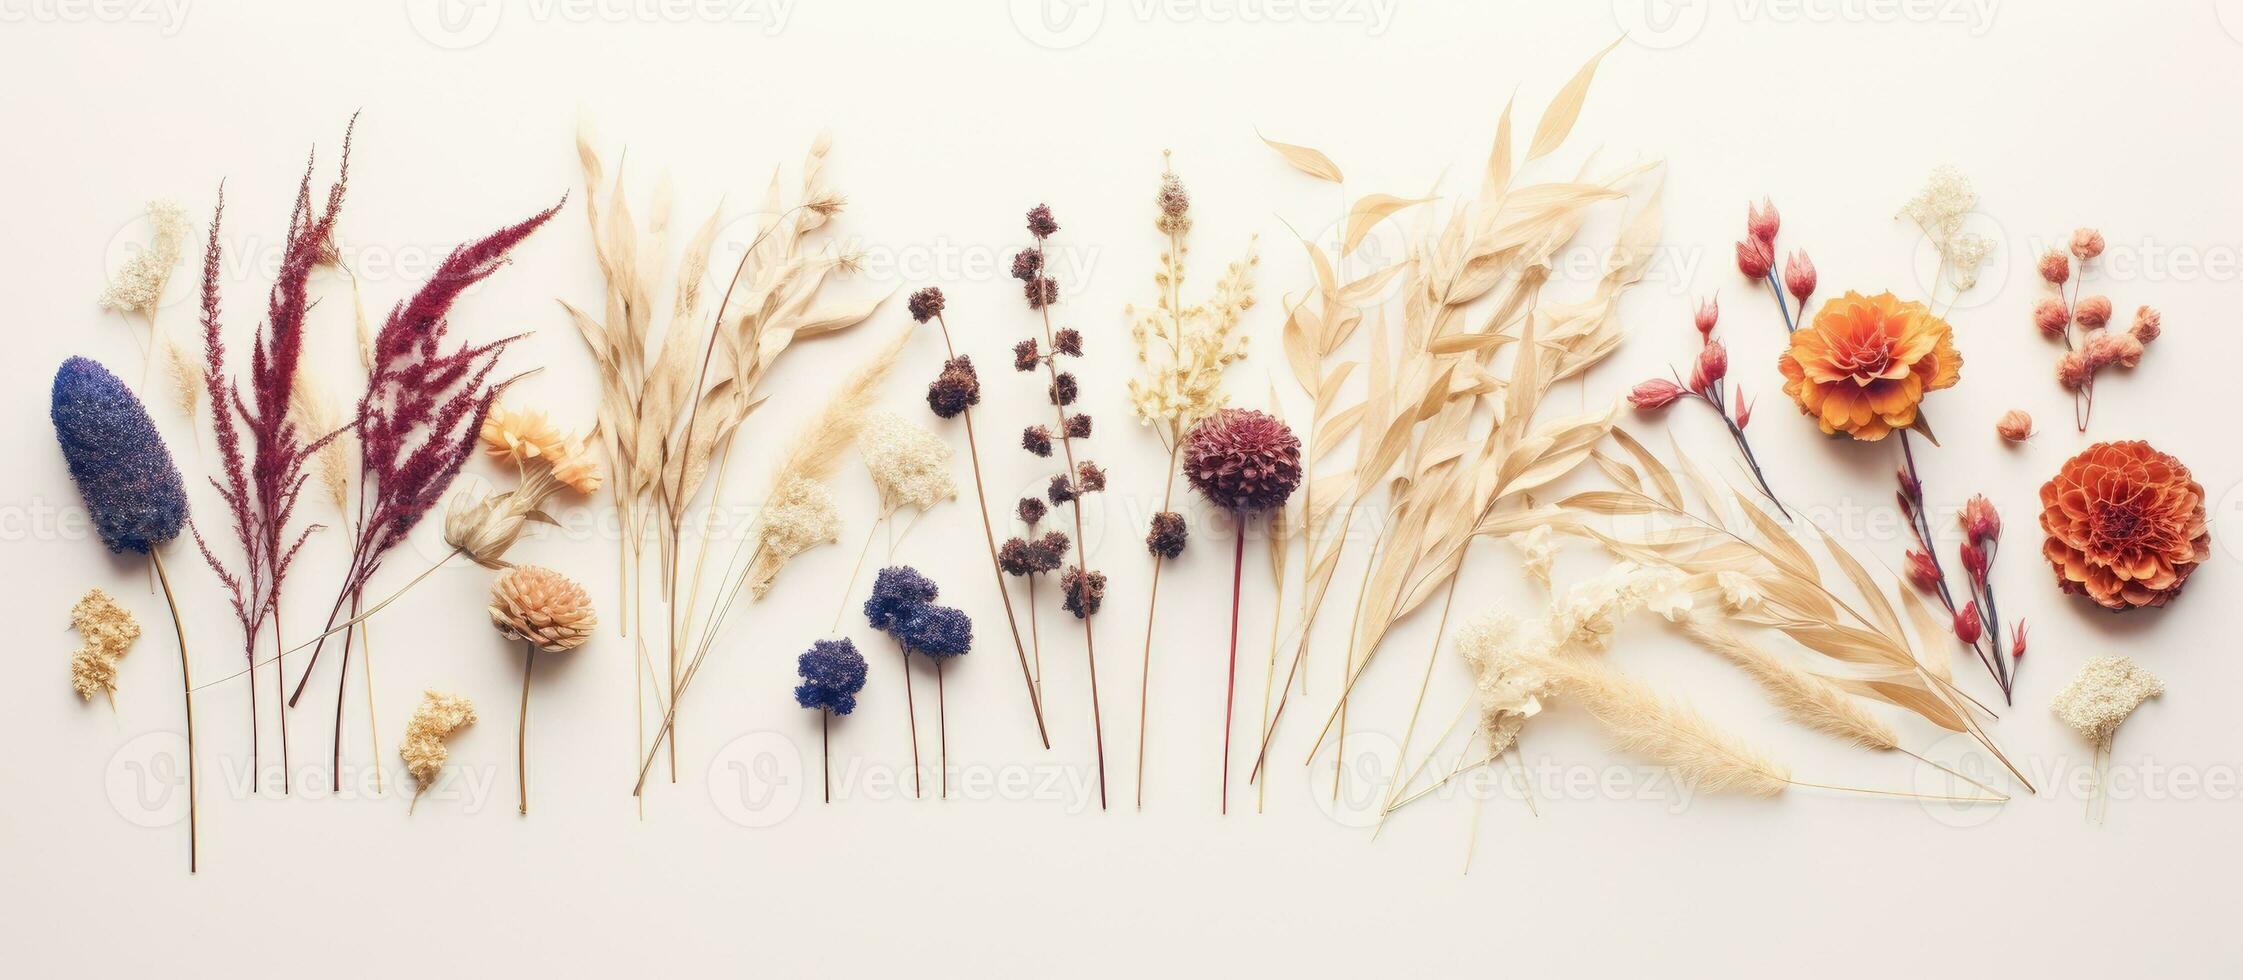 Minimal style photography featuring dried flowers arranged in a creative and natural composition, photo